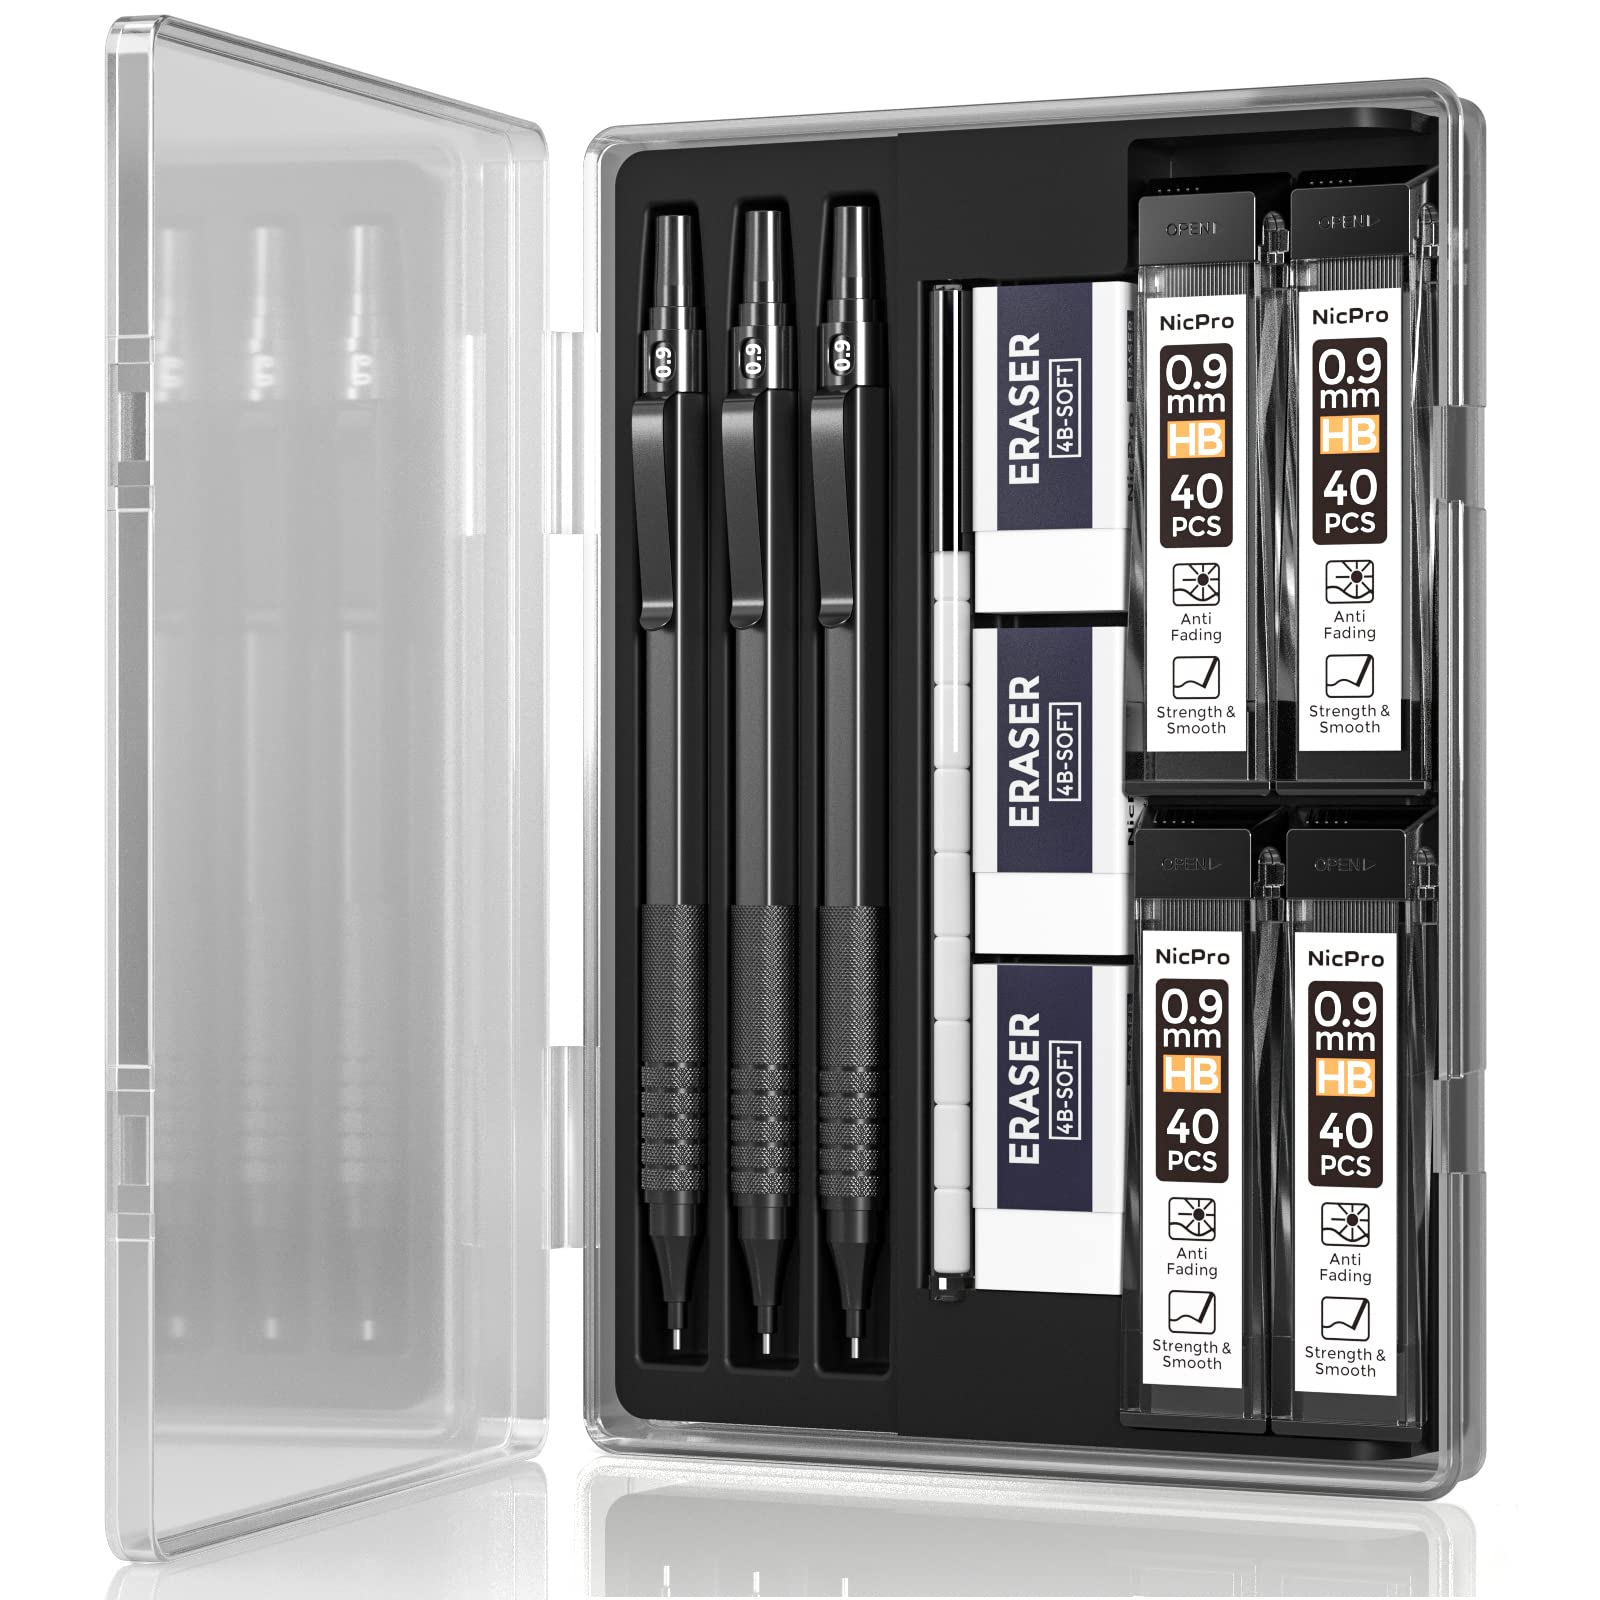 Nicpro Metal 0.9 mm Mechanical Pencils Set with Case, 3PCS Black 0.9mm Drafting Pencil, 6 Tubes HB Lead Refills, 3PCS Erasers, Erasers Refills for Adults, Children, Artist Writing, Drawing, Sketching